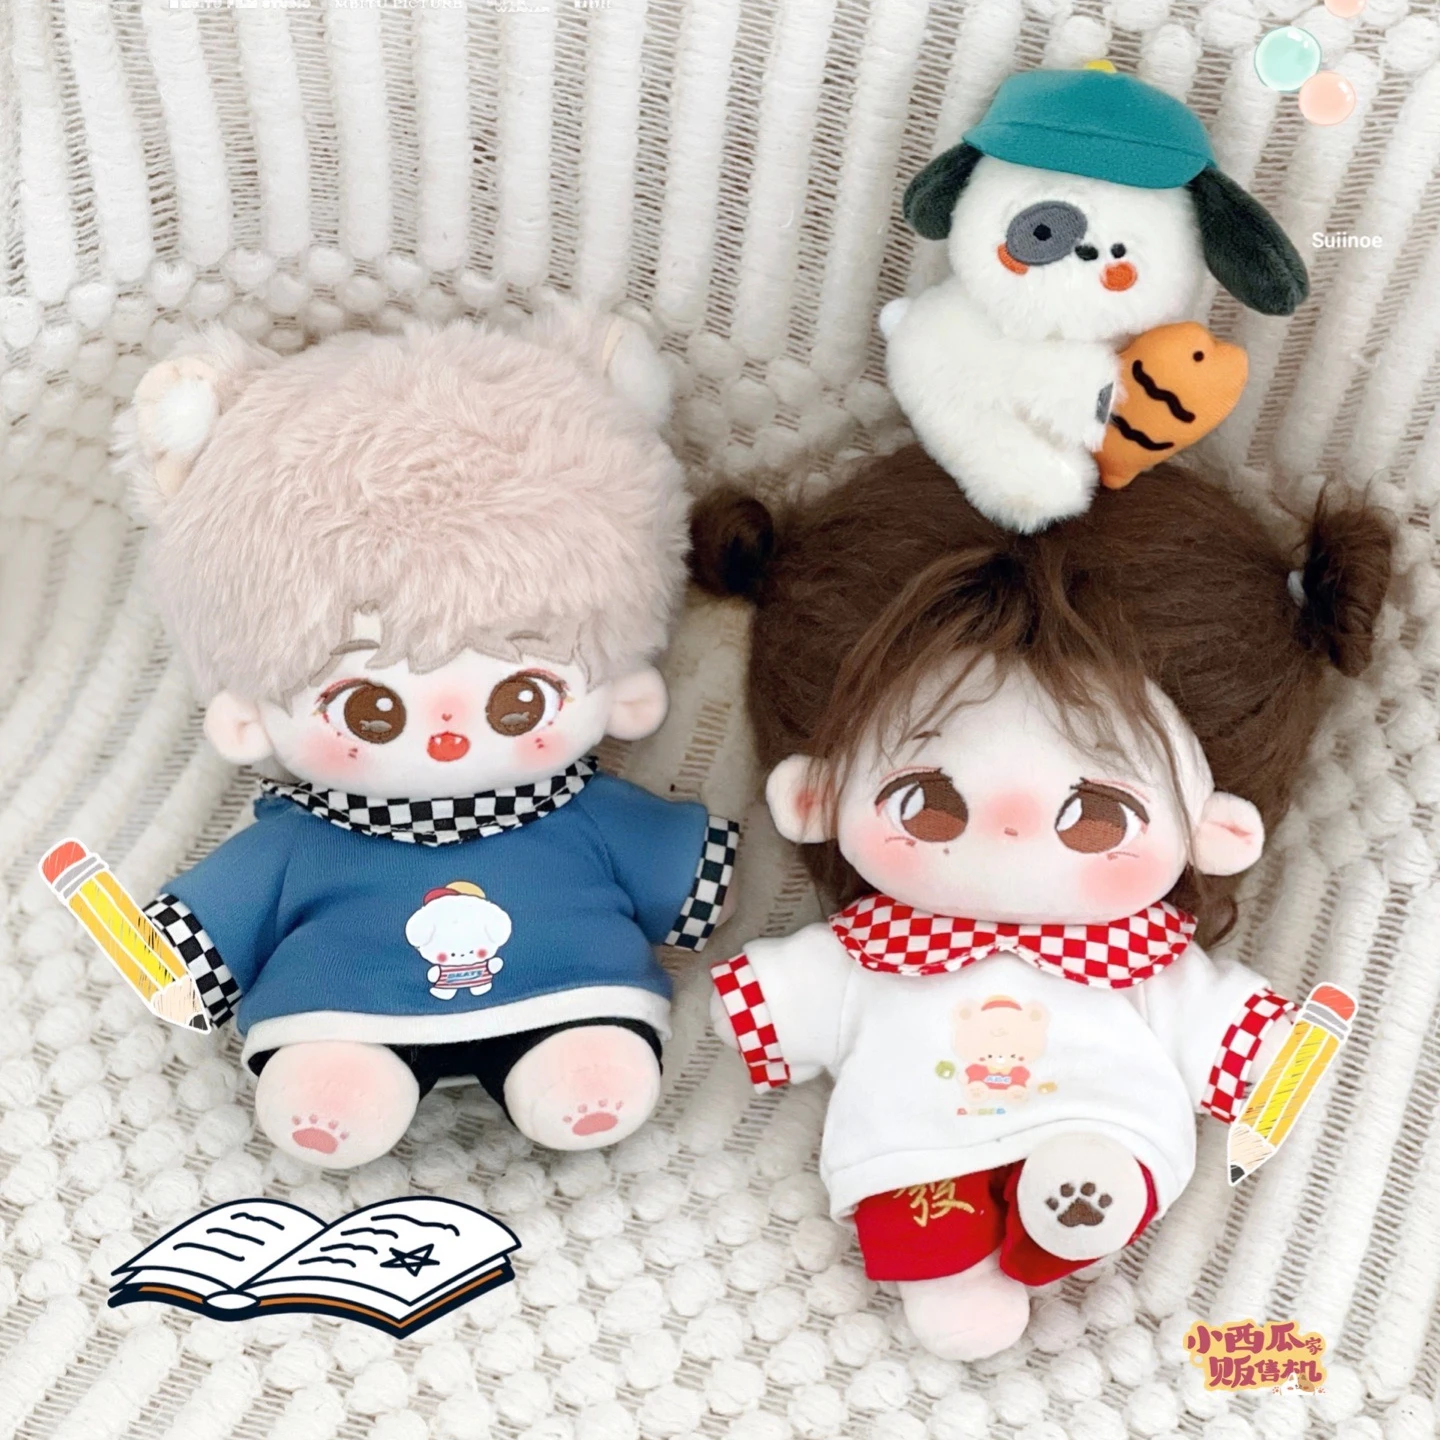 

Handmade 15/20cm 2pc Doll Clothes Cute Checkerboard Puppy T-shirt Shorts Kpop Plush Dolls Outfit Toy Doll's Accessories Cos Suit